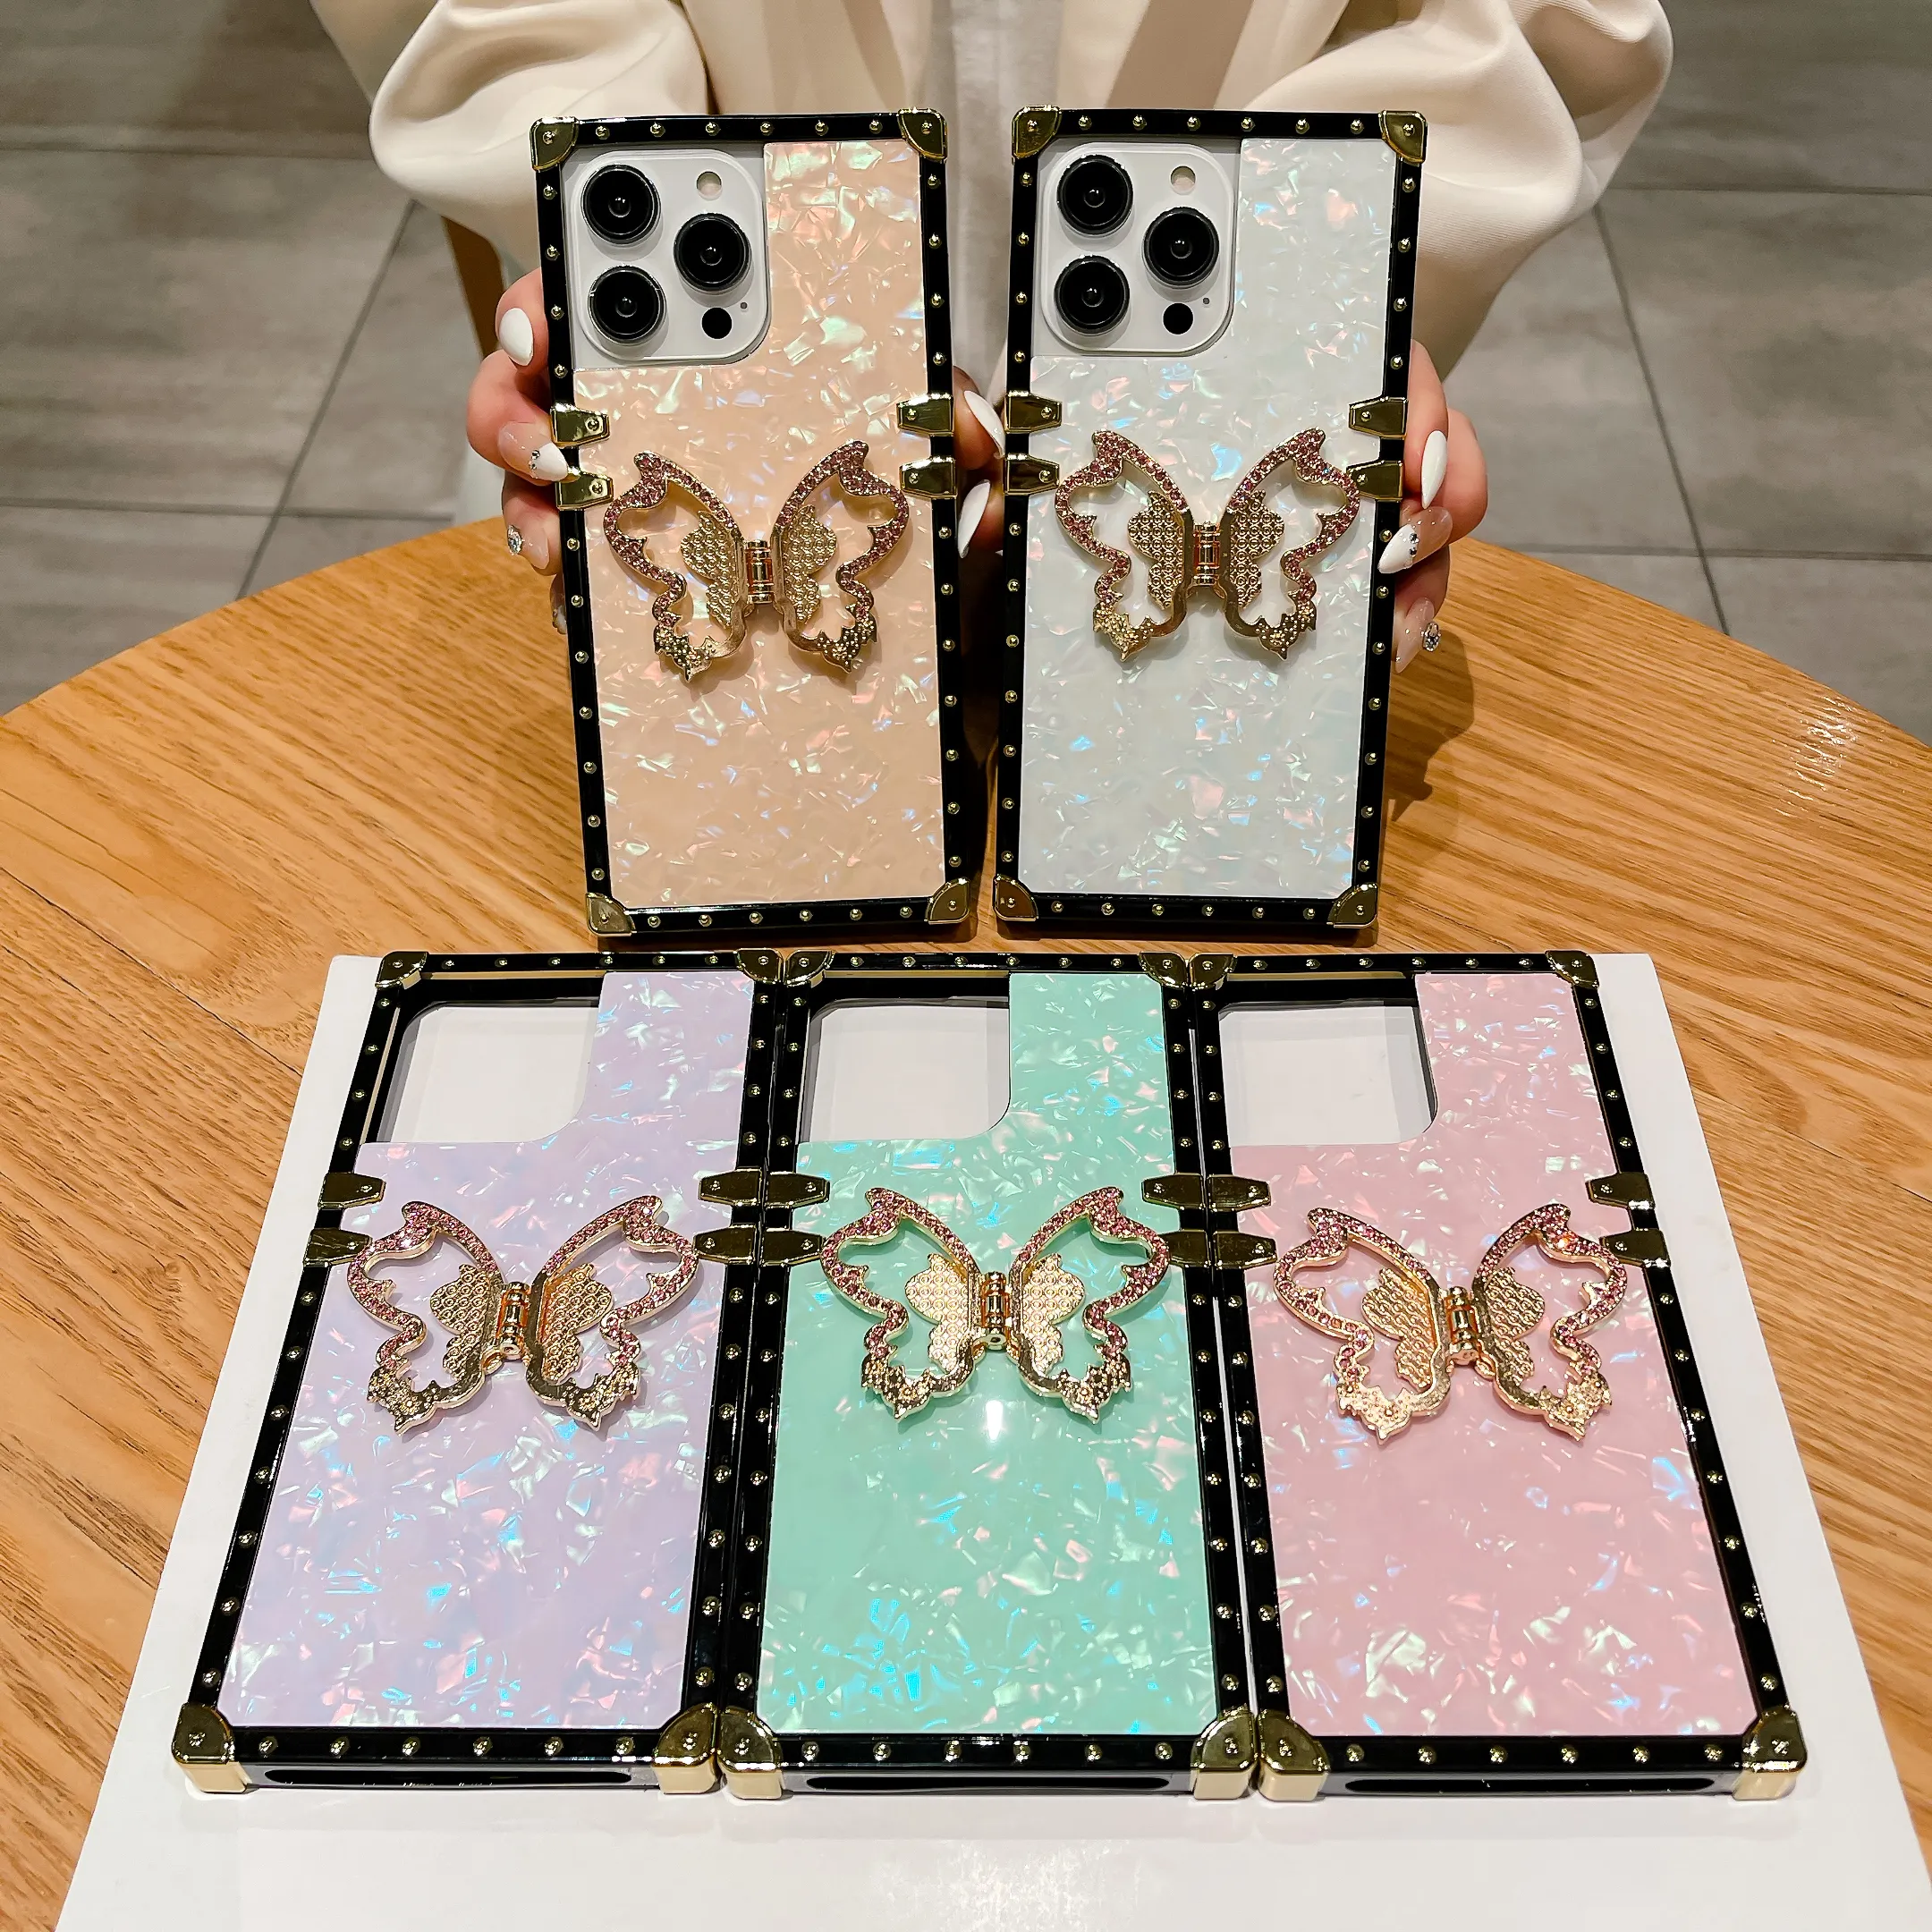 Luxury Designer Square Phone Case Butterfly Jewelry Fashion Protective Cover For Iphone 6 7 8 Plus X Xr 11 12 13 14 Pro Max